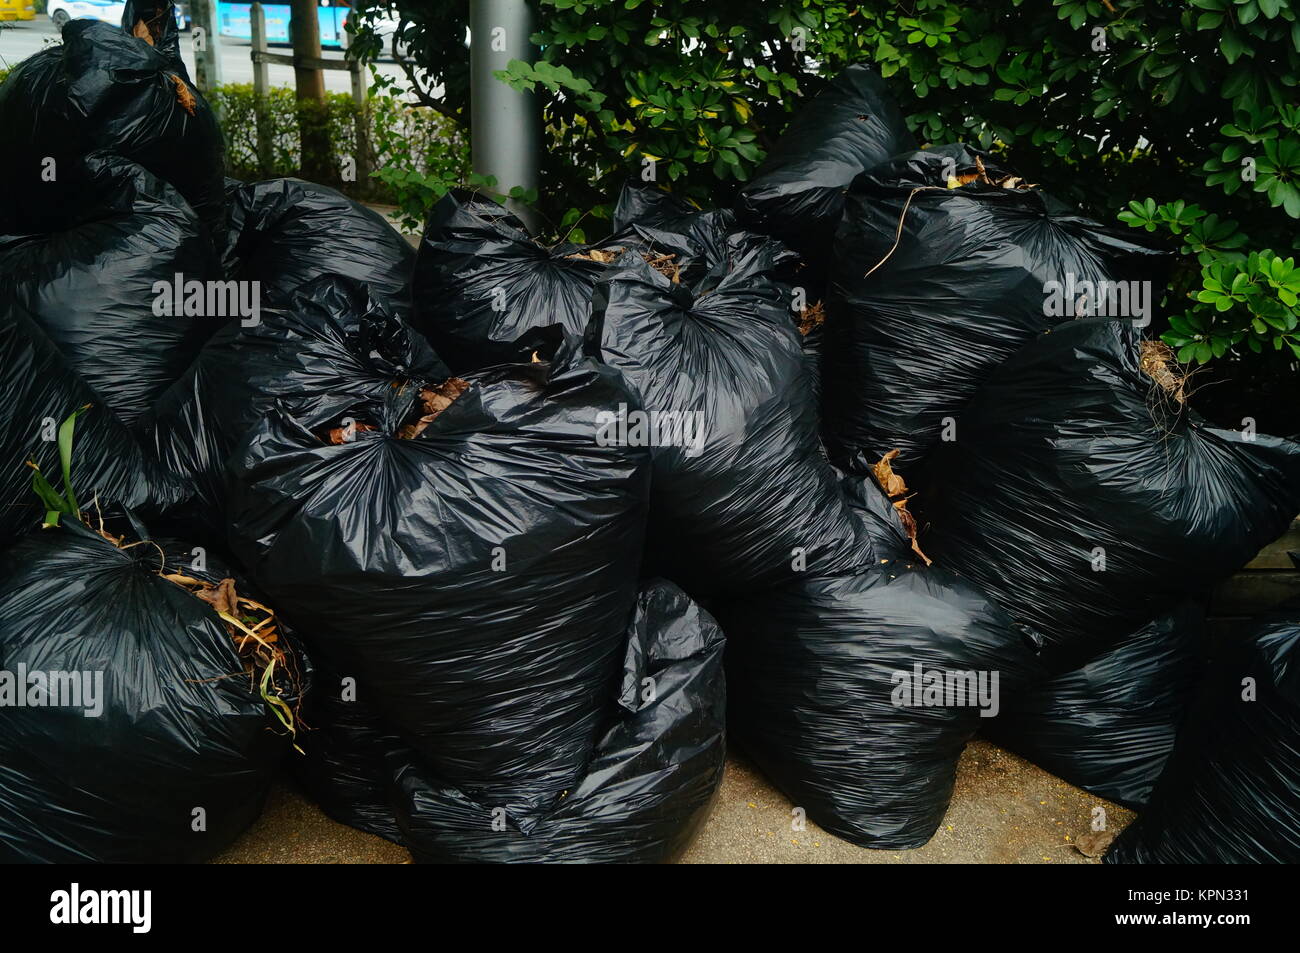 https://c8.alamy.com/comp/KPN331/black-plastic-bags-filled-with-garbage-heaps-of-heaps-on-the-city-KPN331.jpg